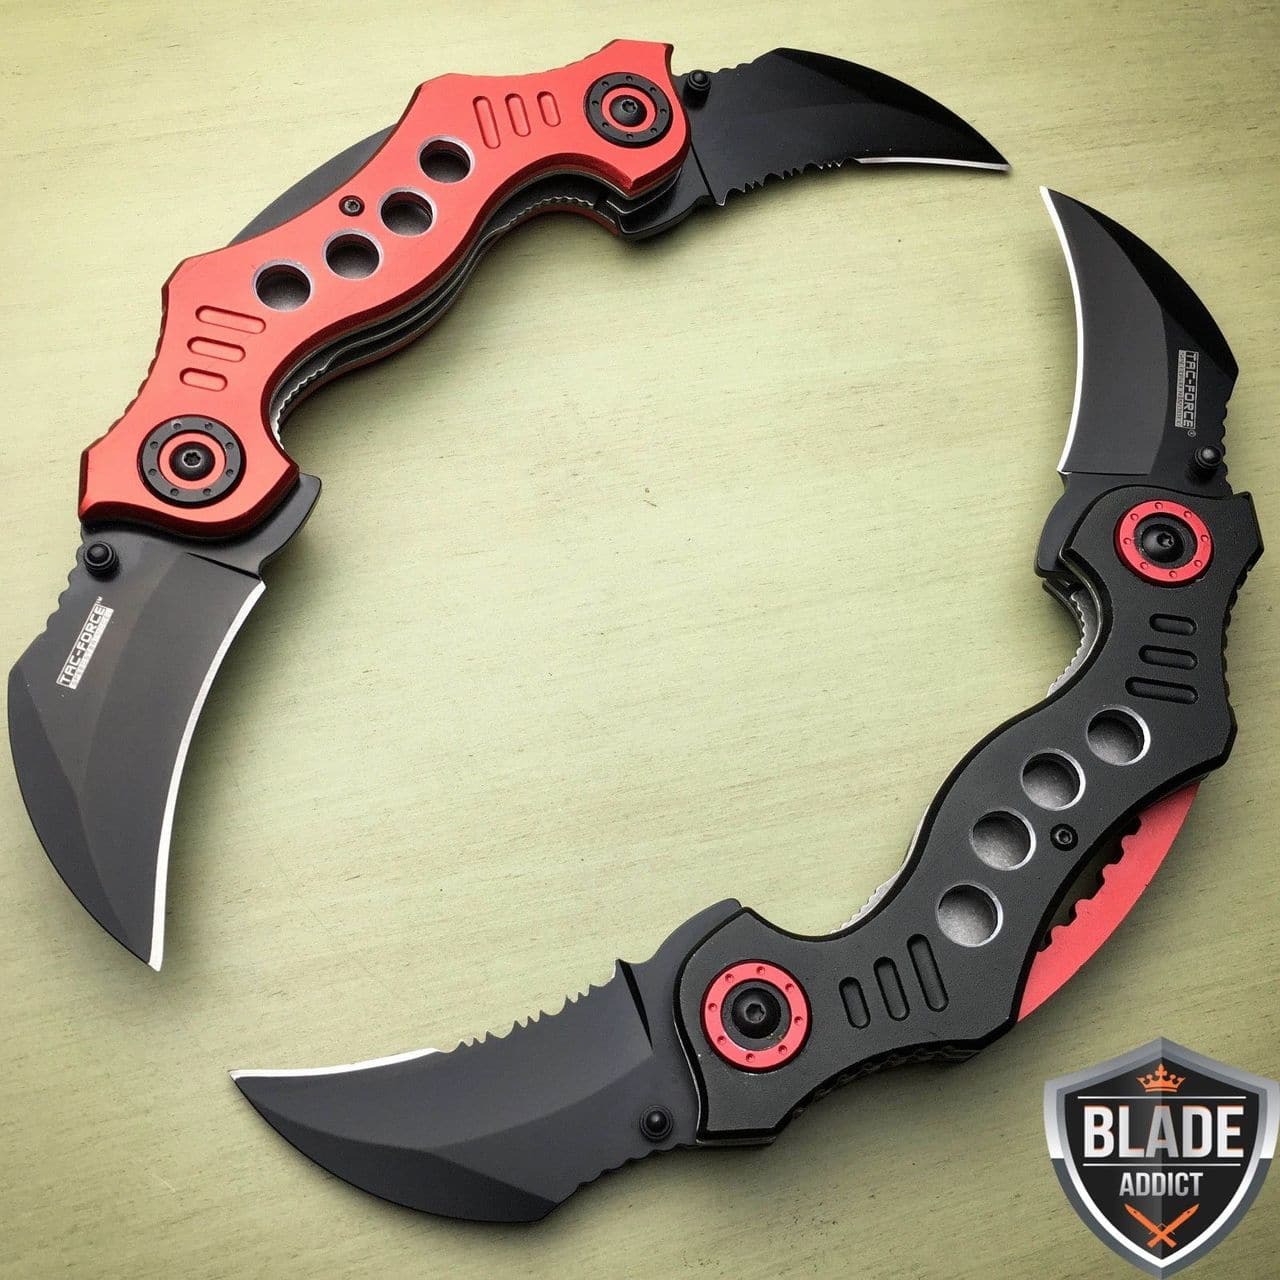 2PC TWIN DUAL BLADE Karambit Claw SPRING ASSISTED OPEN Folding POCKET KNIFE EDC